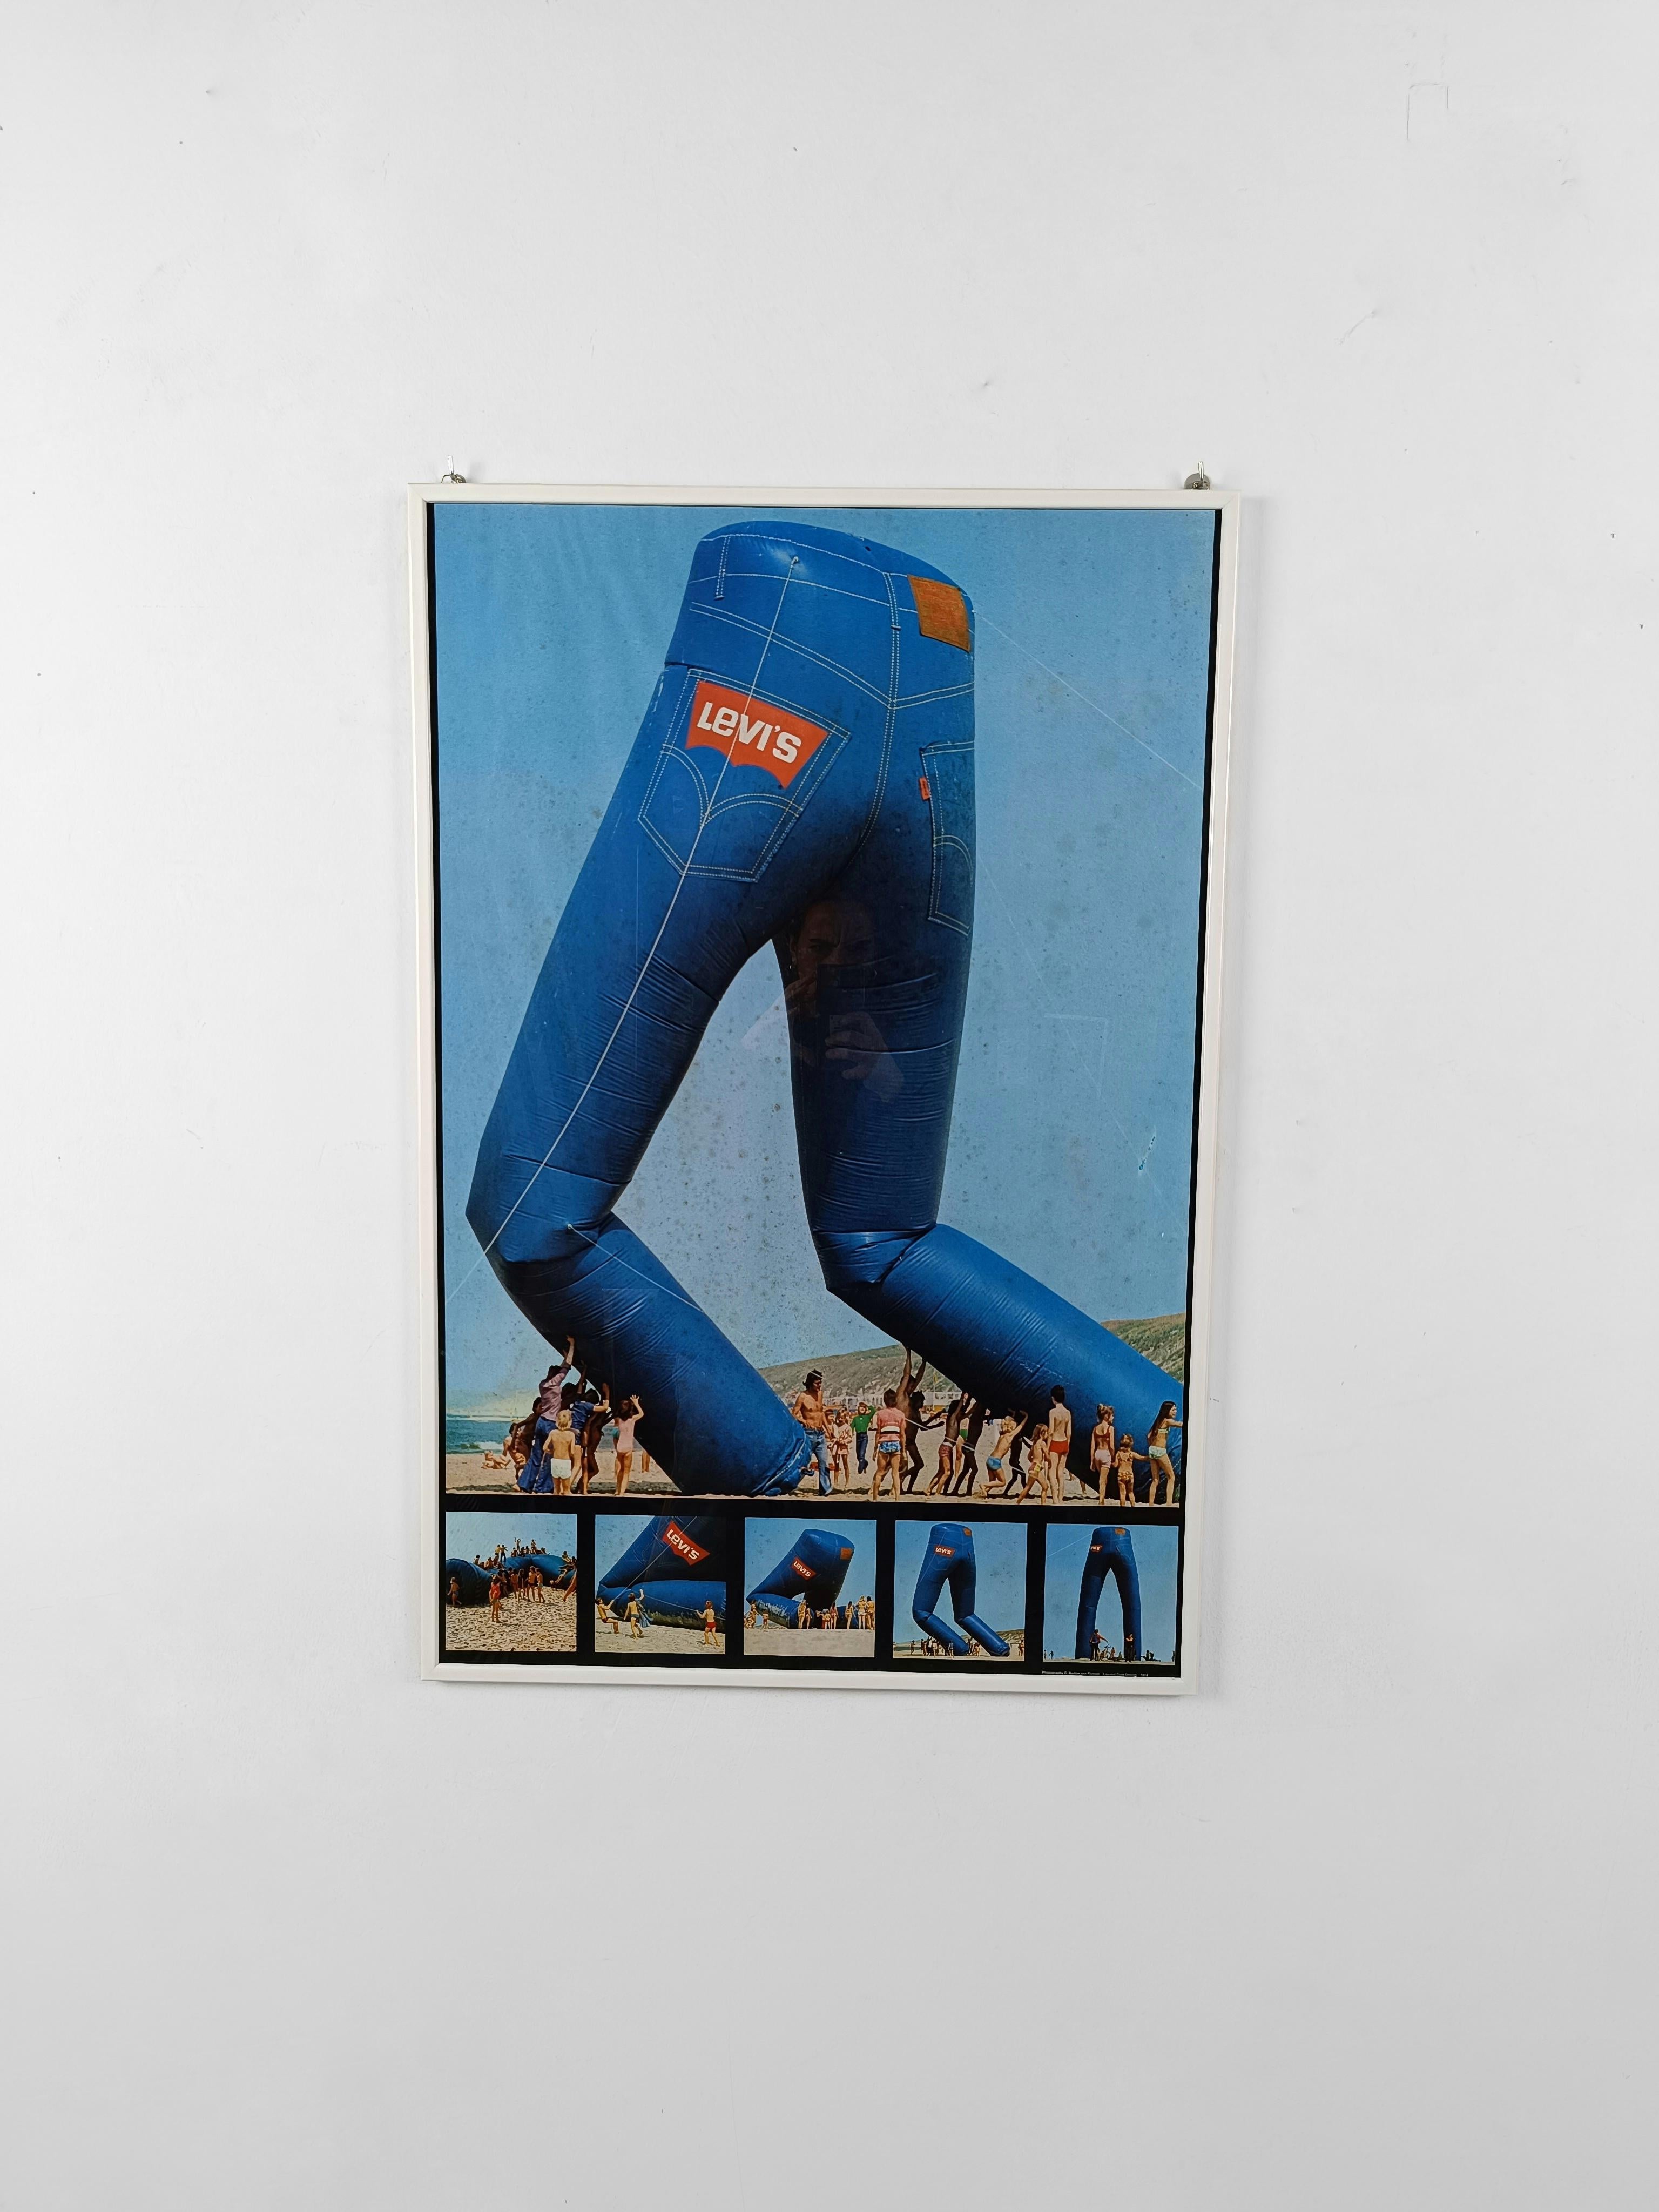 Vintage Levi's Advertising Poster from 1974, Photography by C. Barton van Flymen 2